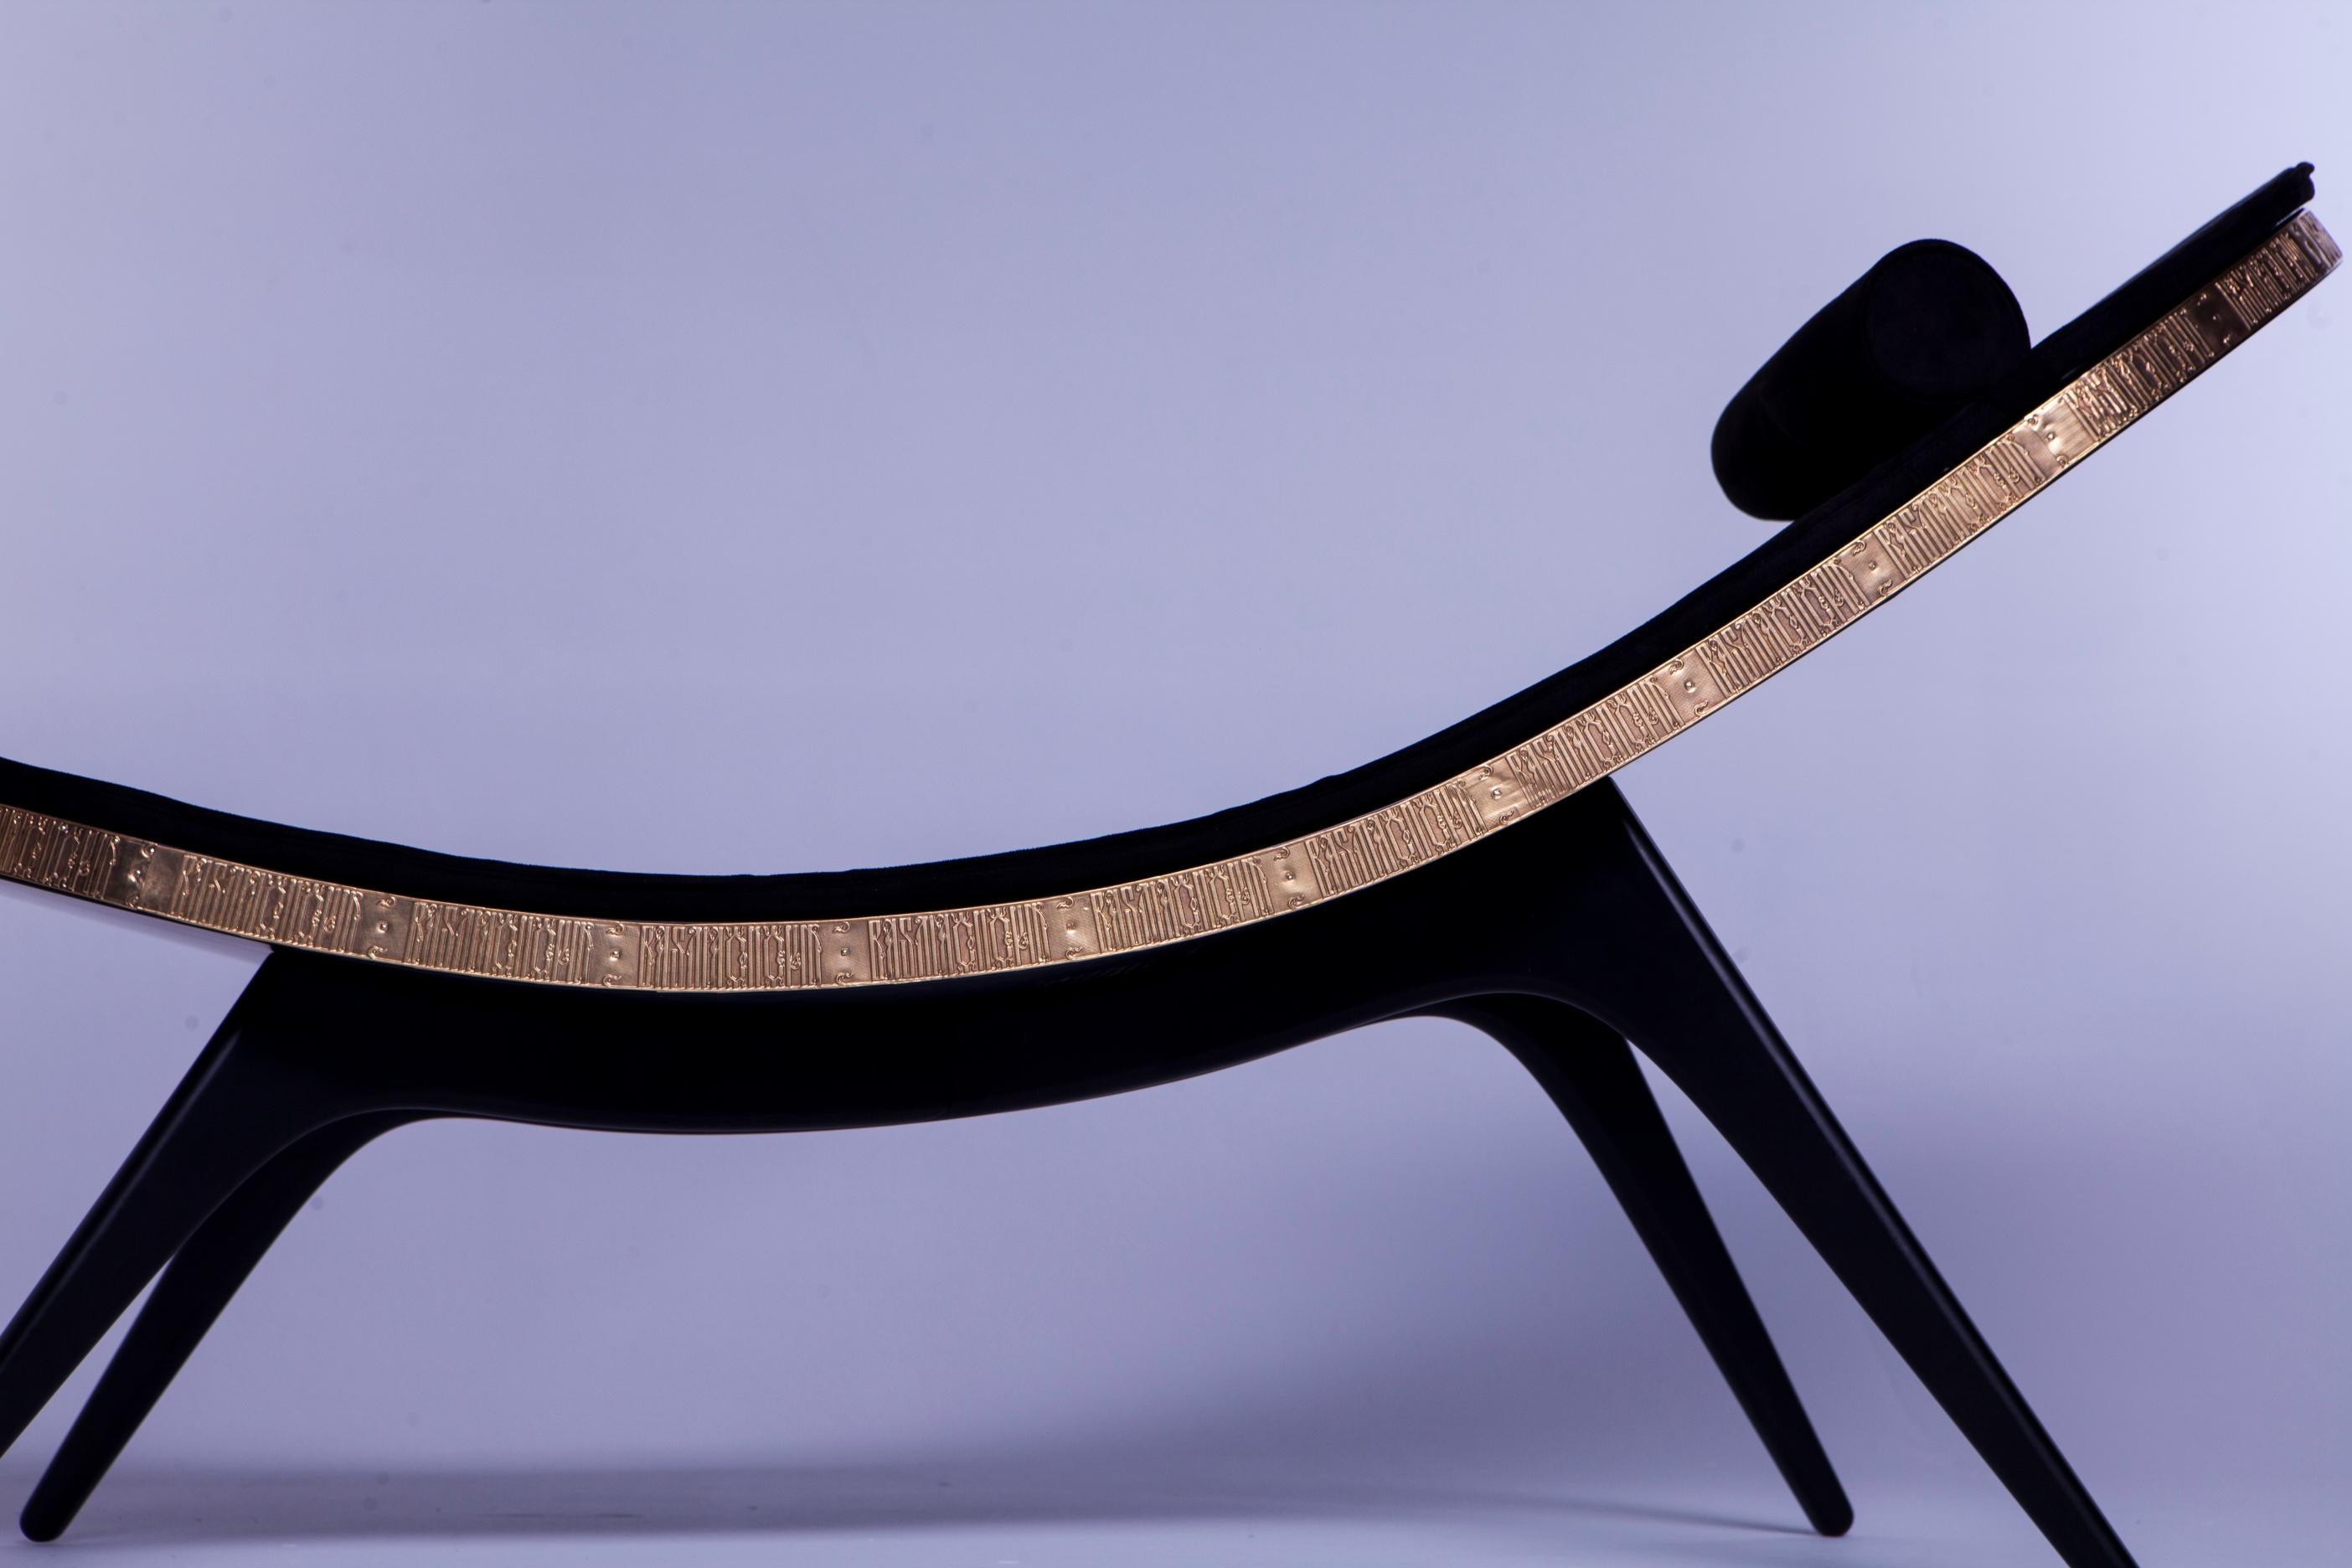 Brass contemporary lounge chair Signed by Semen Lavdansky and Ivan Basov
Material: Brass, metal girdle
Dimensions: 74 x 51 x 137 cm
Can be made to order in different dimensions

Ivan Basov is one of the leading figure of the contemporary